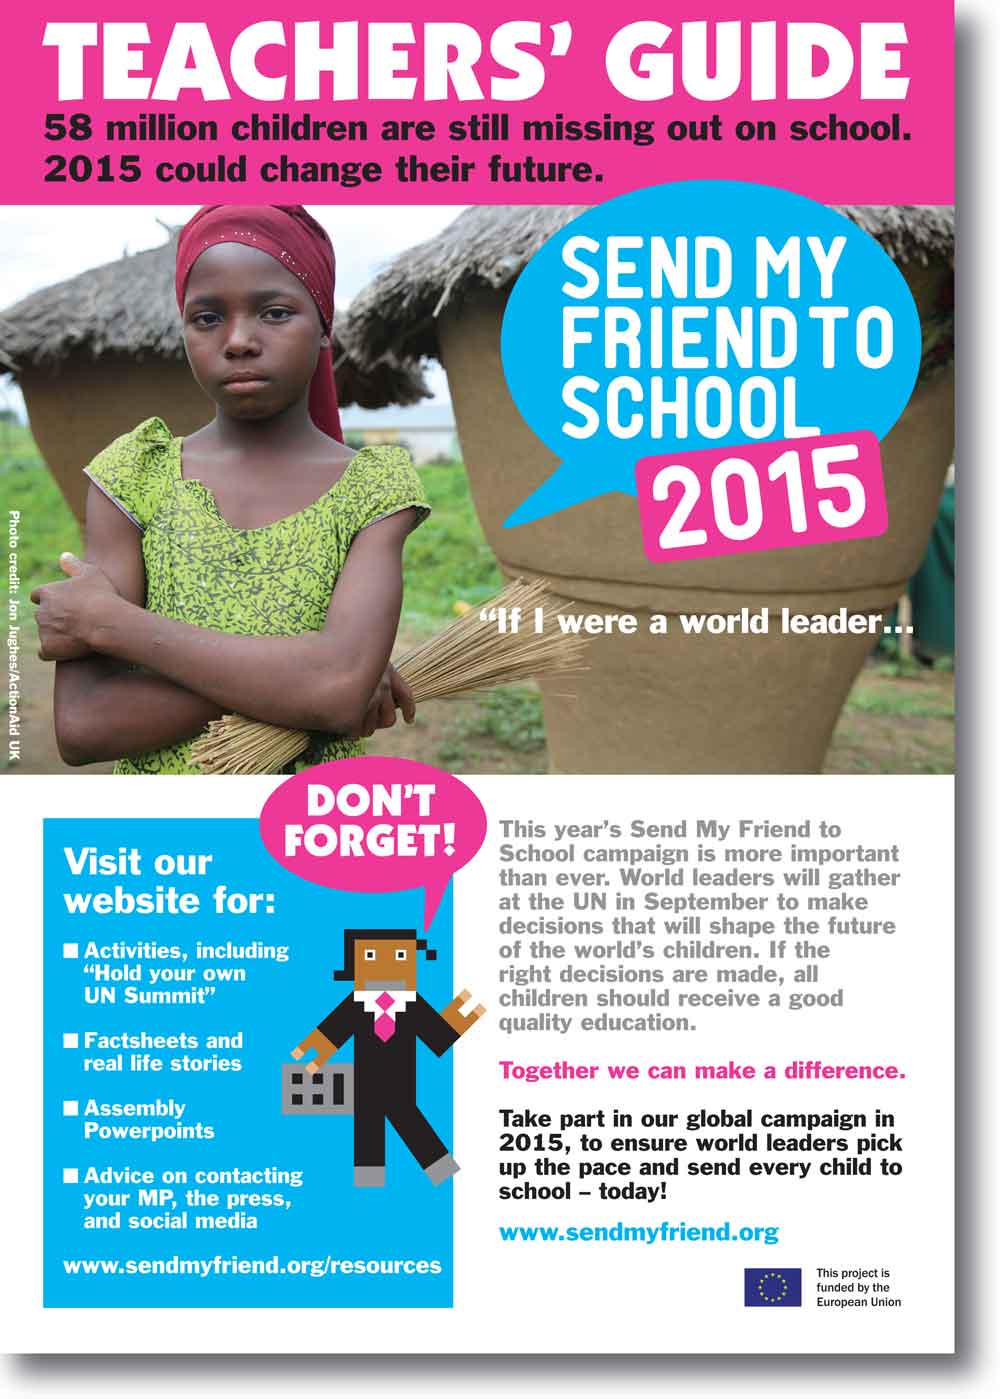 send my friend to school campaign teacher's guide designed by ideology.uk.com